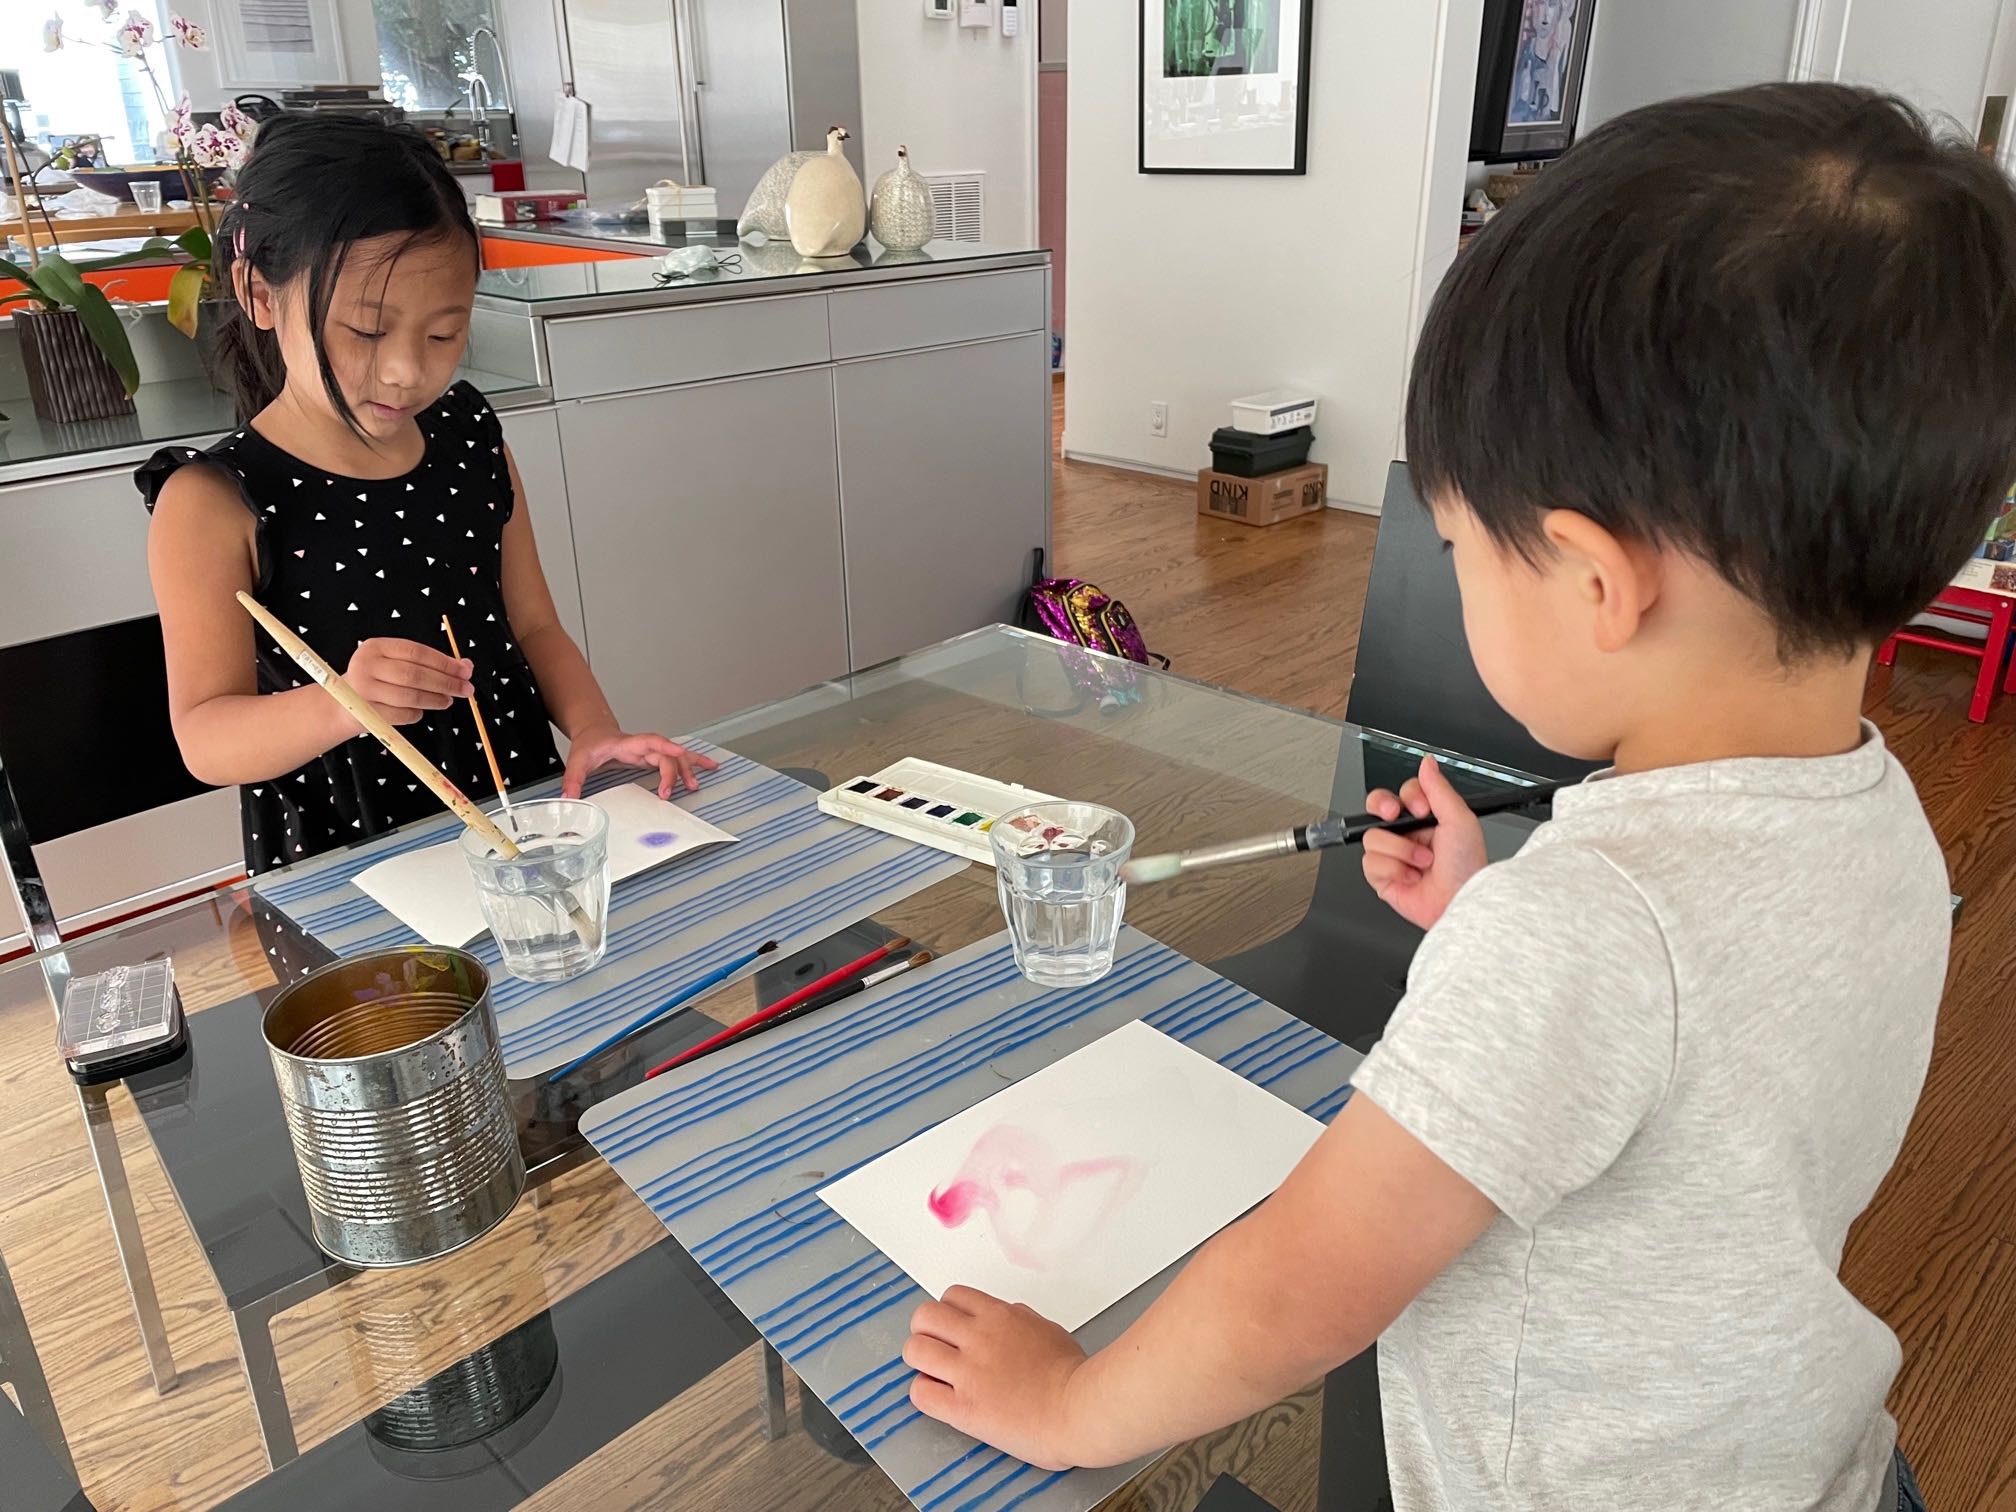 Kids painting Mother's Day cards.